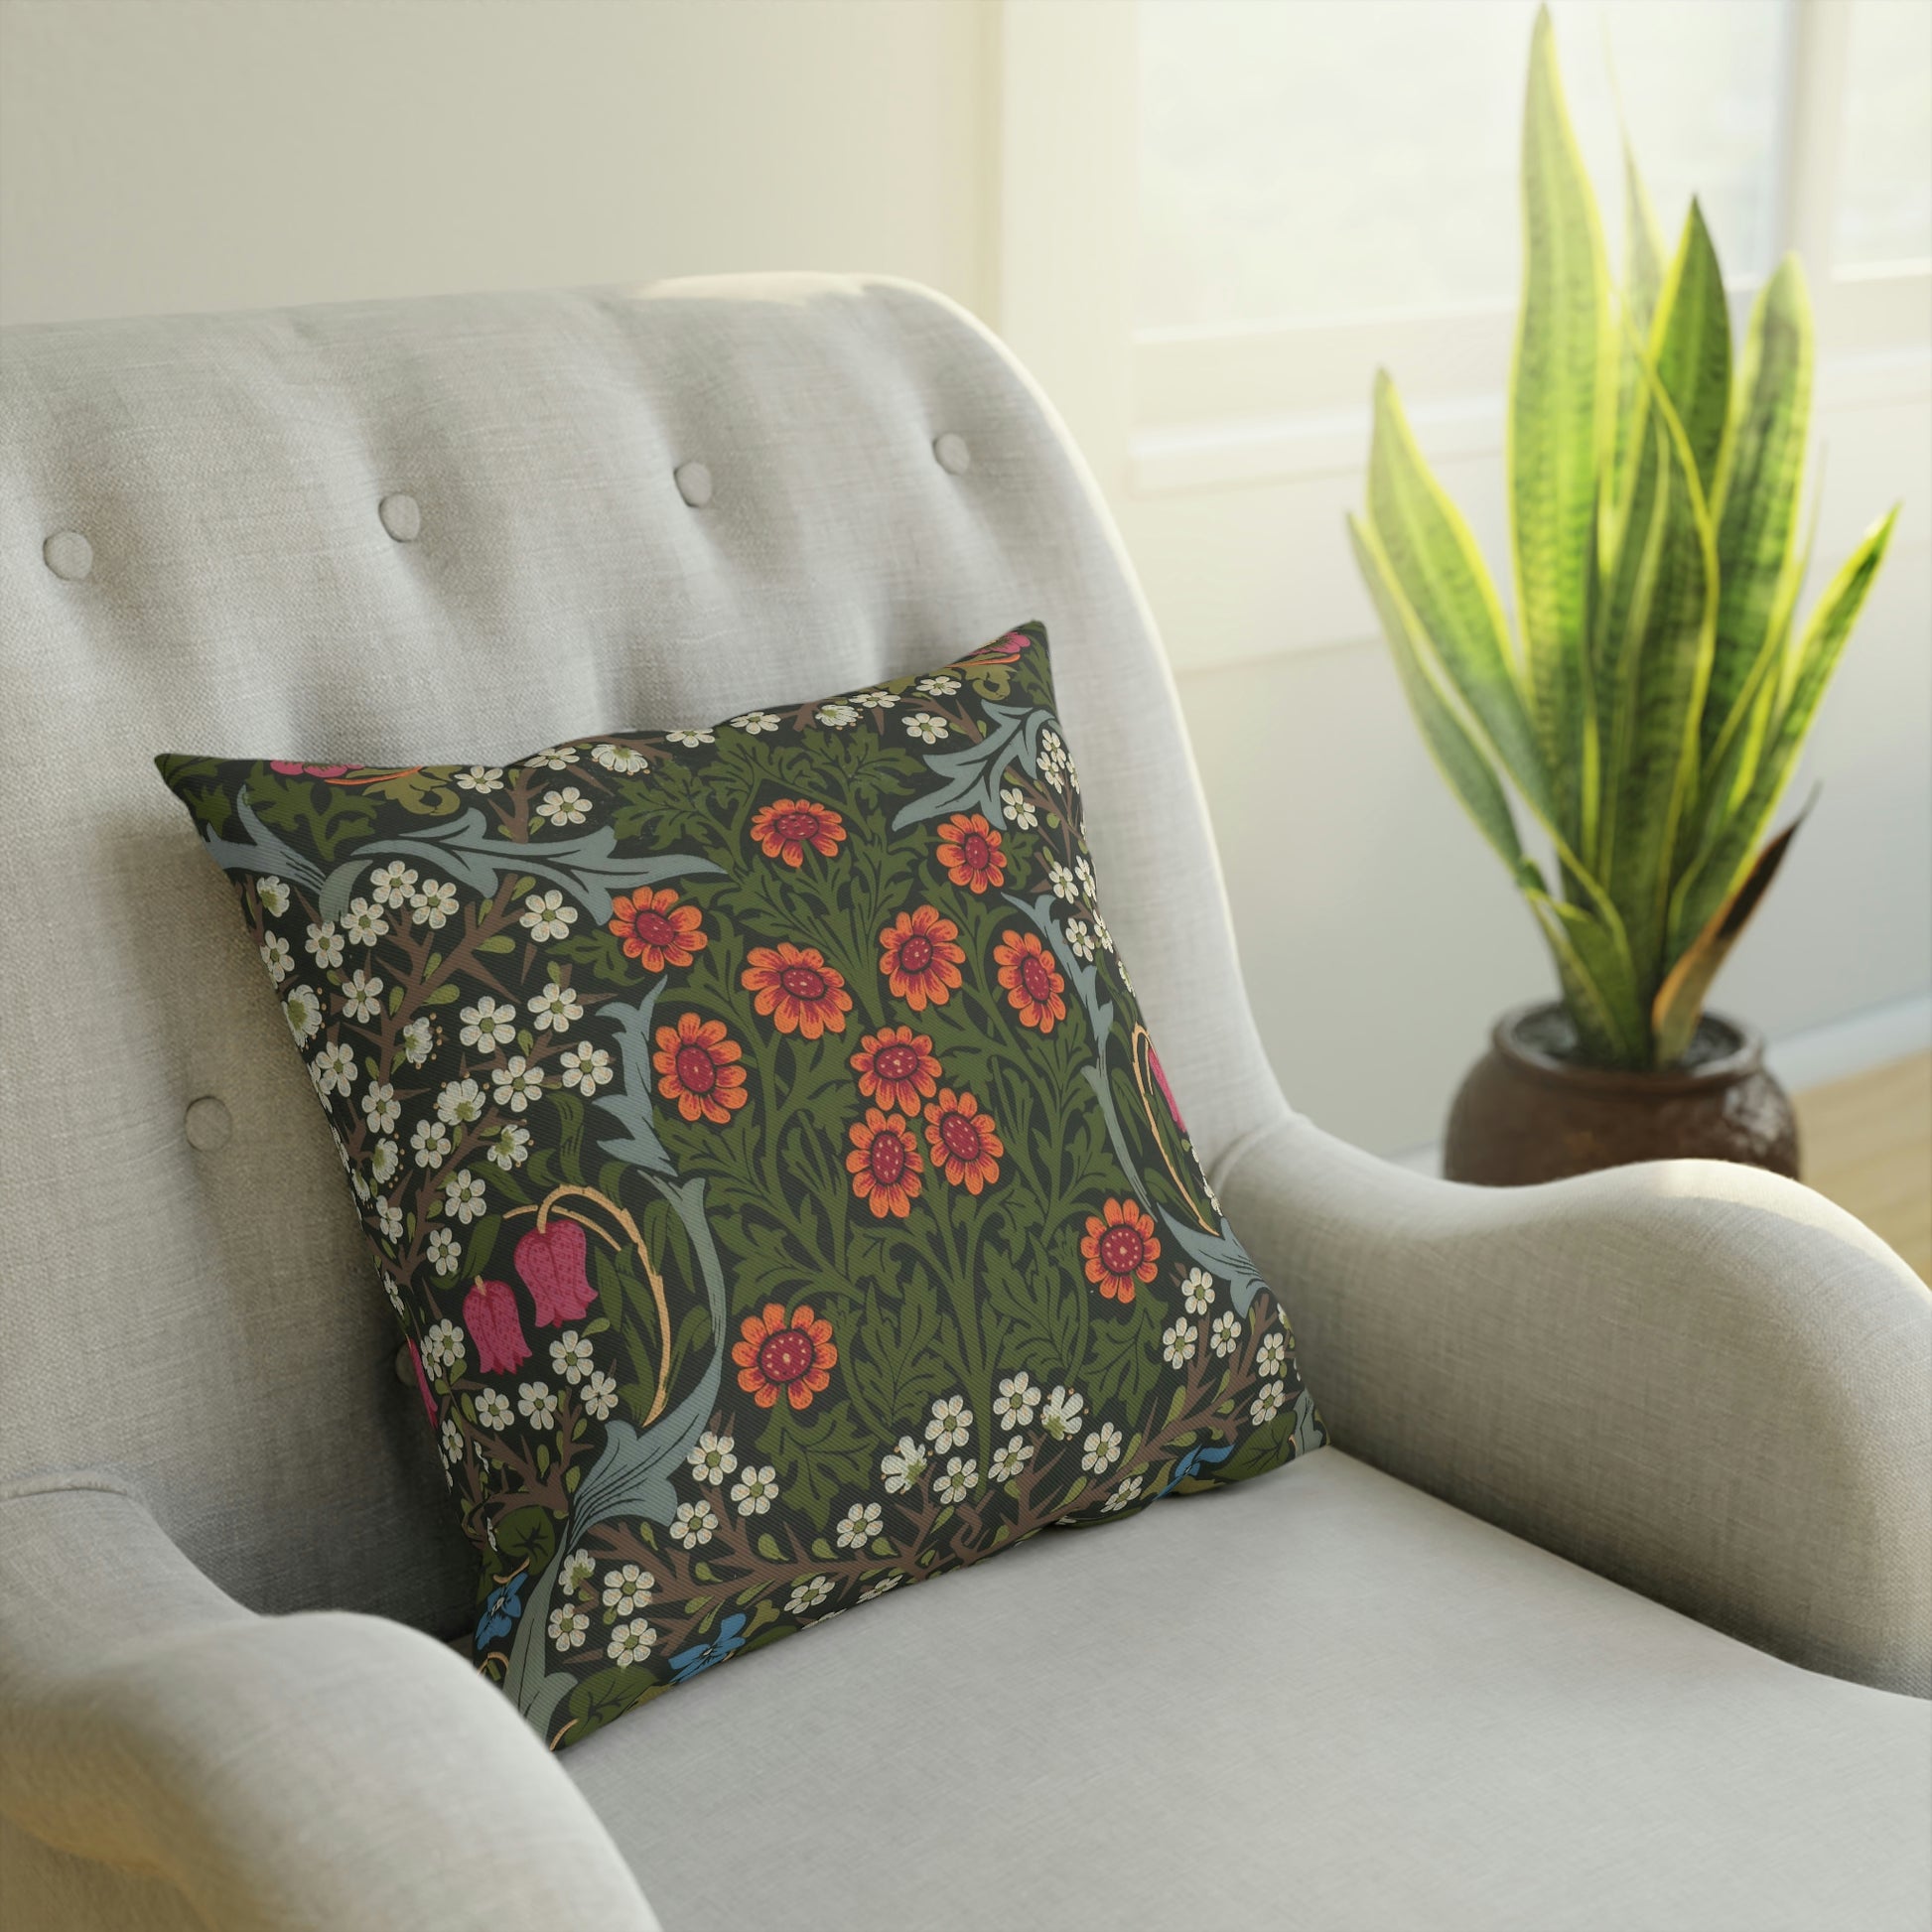 william-morris-cushion-and-cushion-cover-blackthorn-collection-5